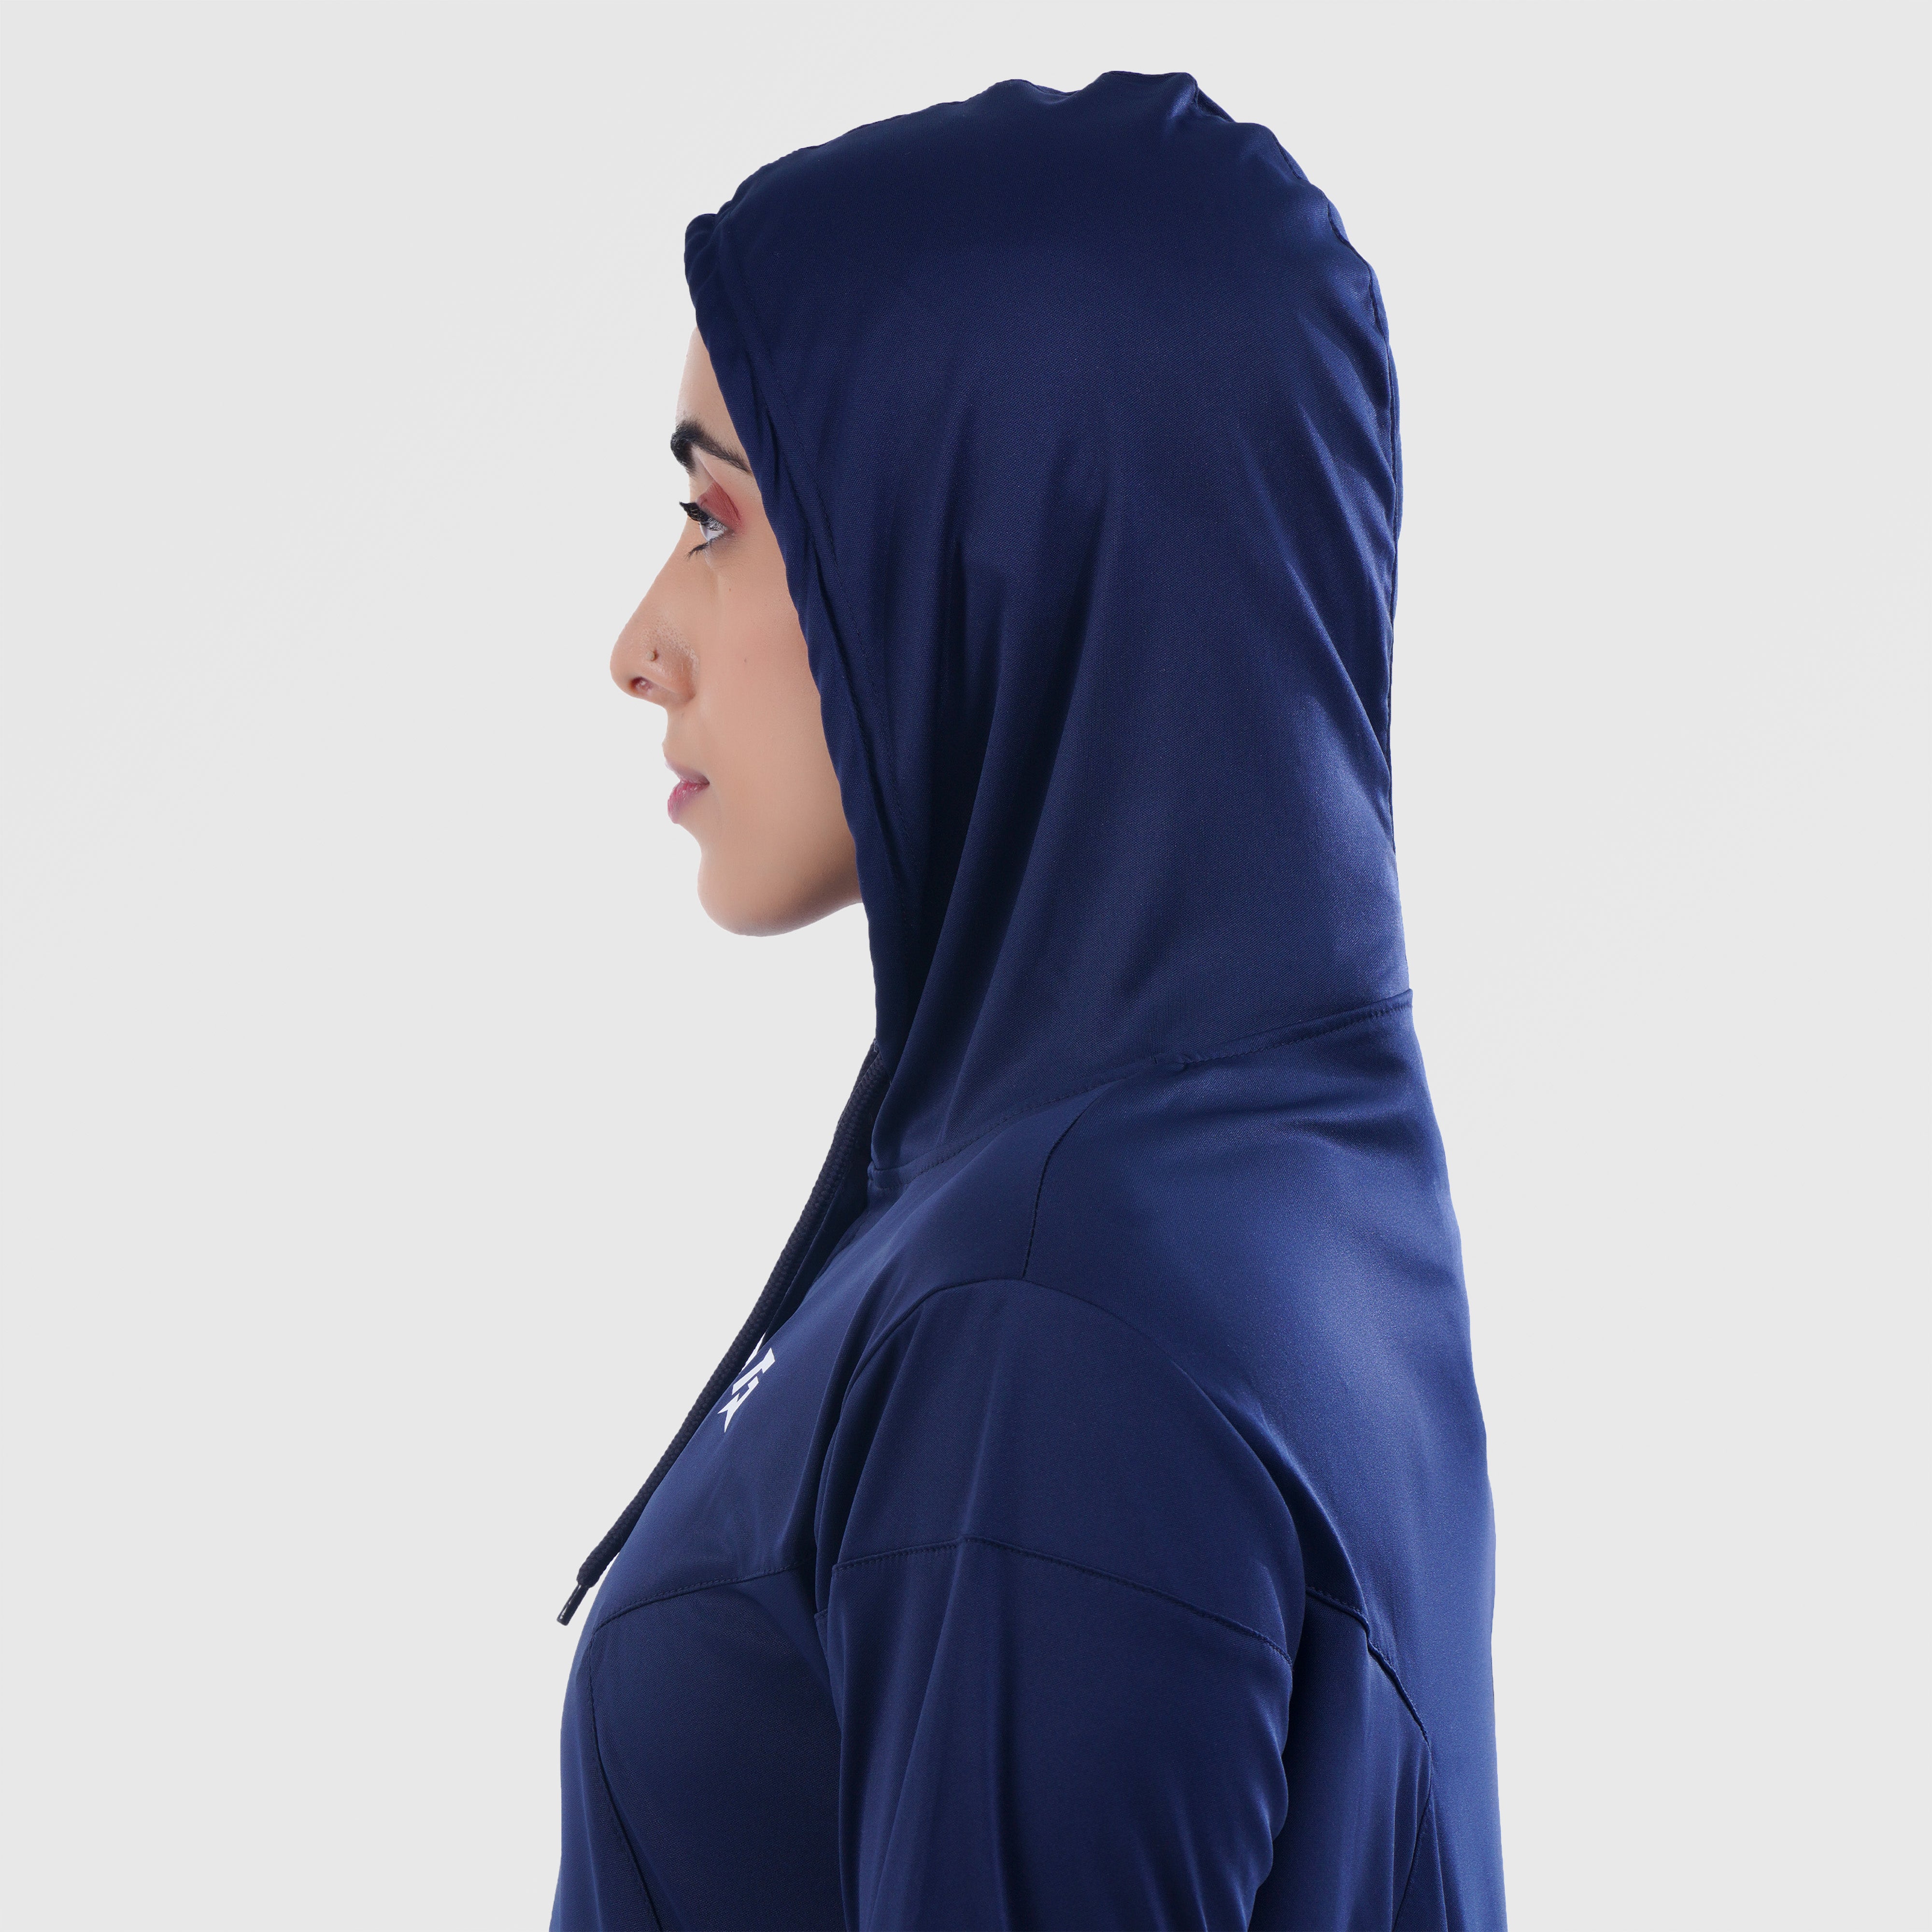 Enigma Covered Top (Navy)